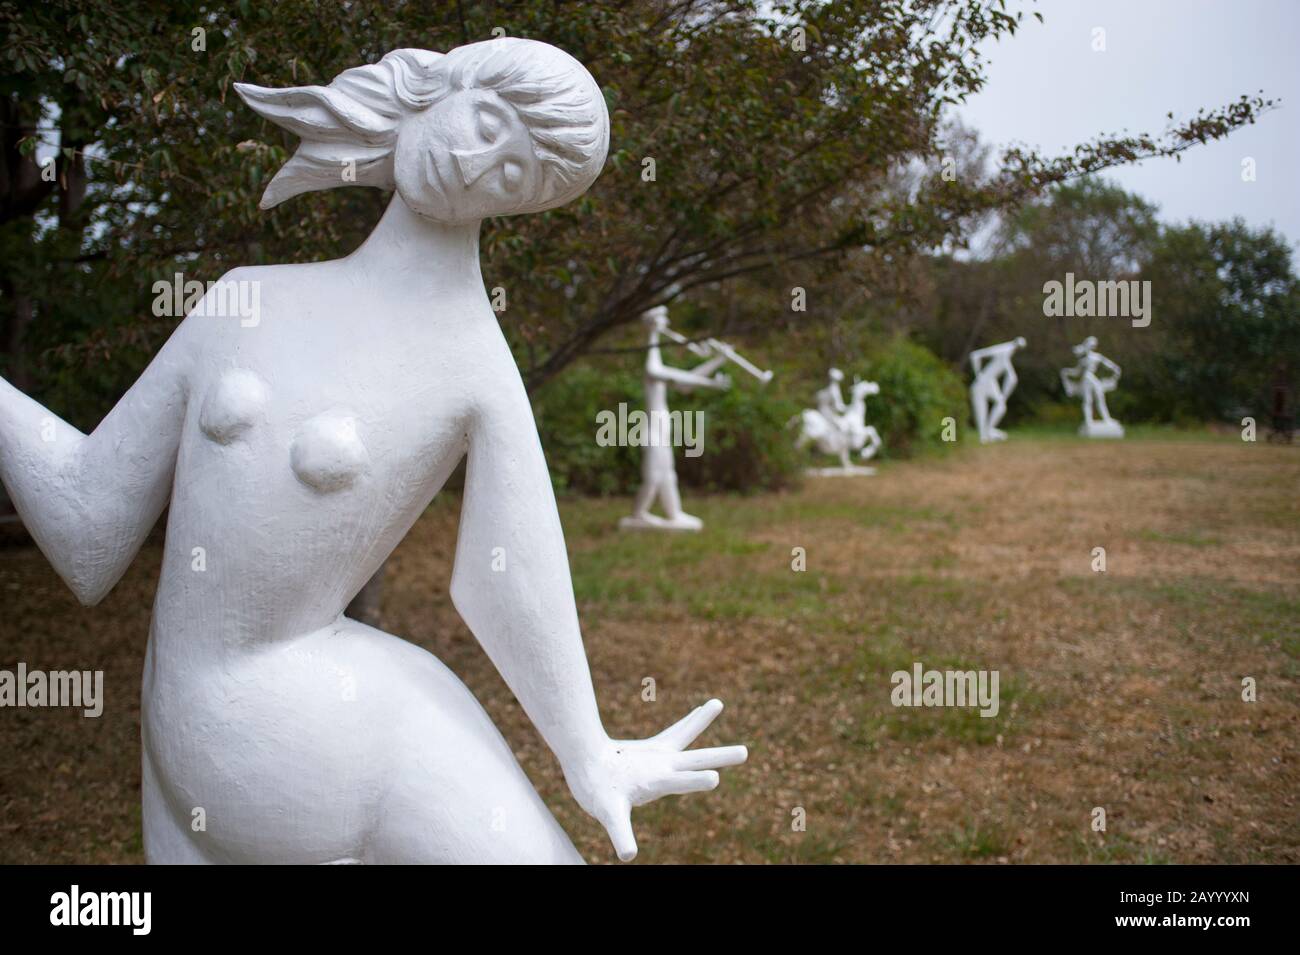 Statues in an outdoor art exhibit at the Field Gallery in West Tisbury on Martha’s Vineyard, Massachusetts, USA. Stock Photo